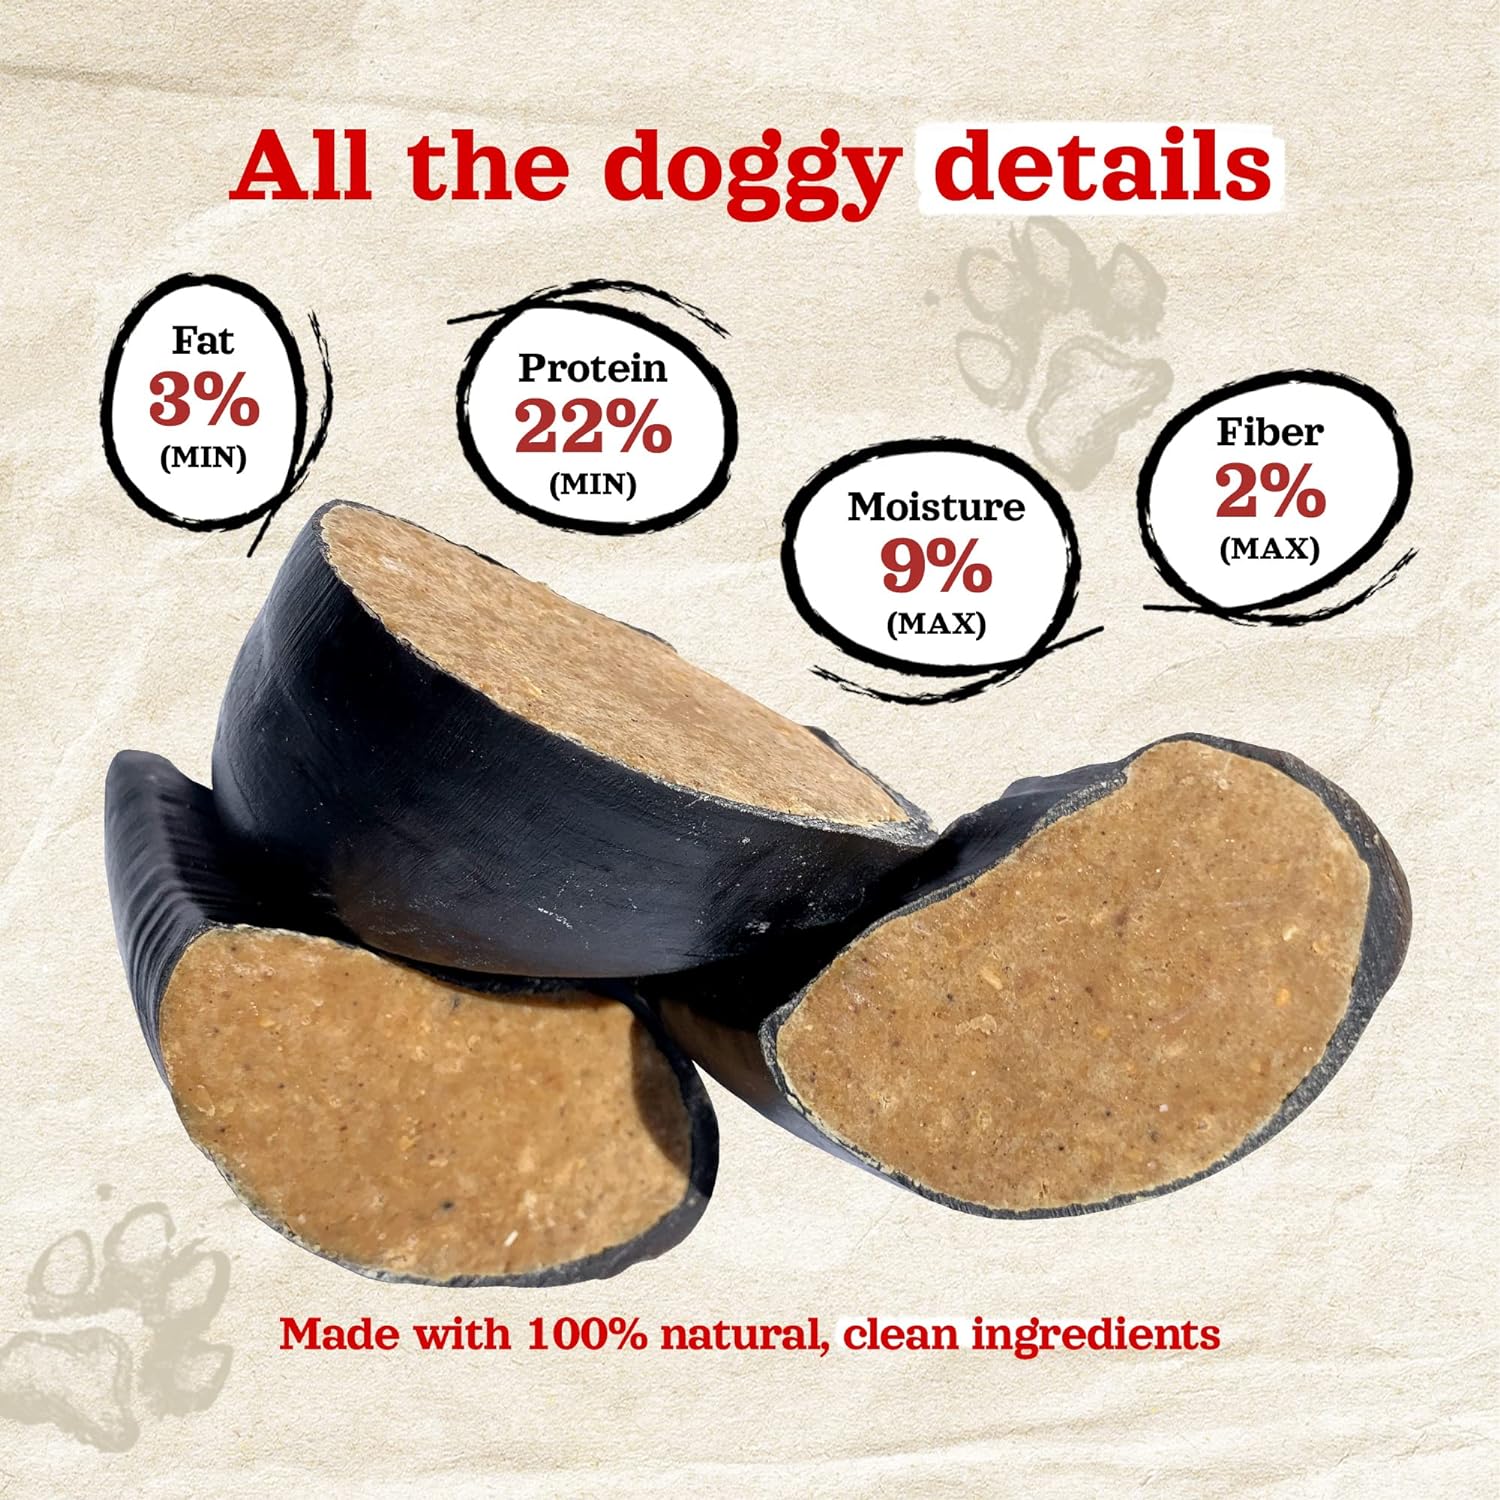 Natural Farm Peanut Butter Flavor Filled Cow Hooves for Dogs (4-Pack), Long-Lasting Natural Beef Bone Treats, Best for Small, Medium & Large Dogs : Pet Supplies